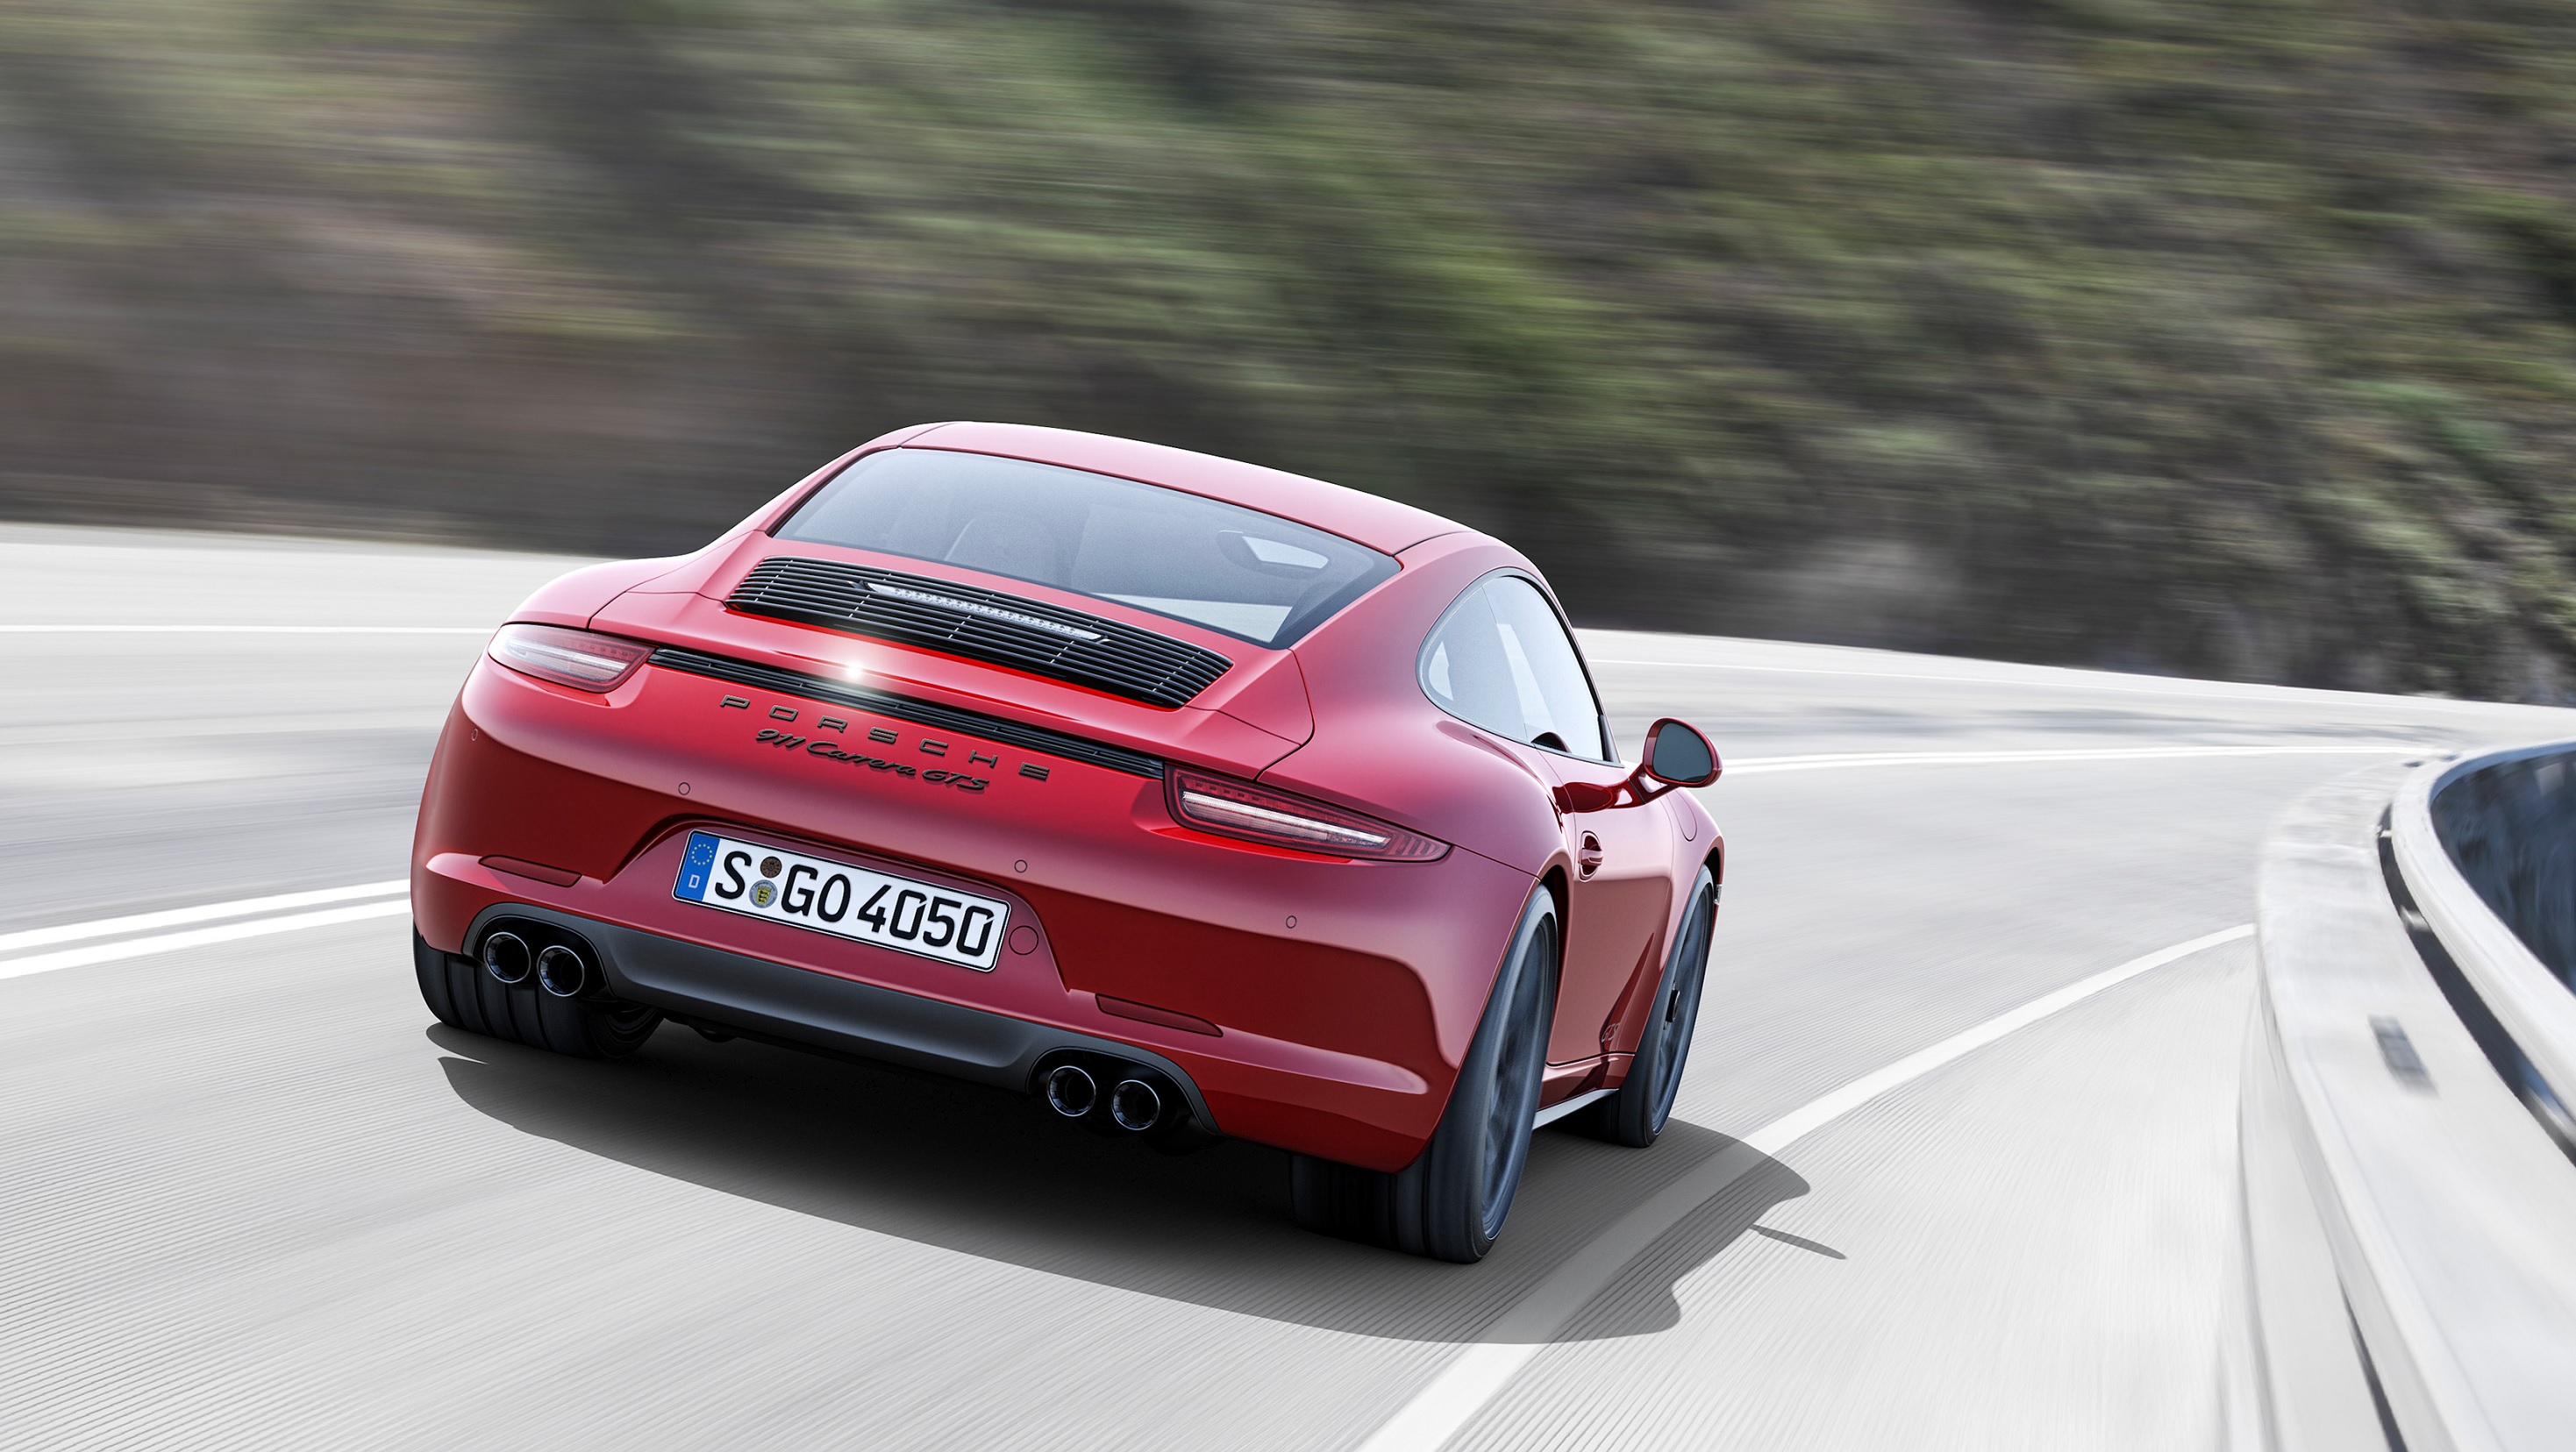 The rear 3/4 view of a red 2015 Porsche 991.1 911 Carrera GTS driving down a canyon road